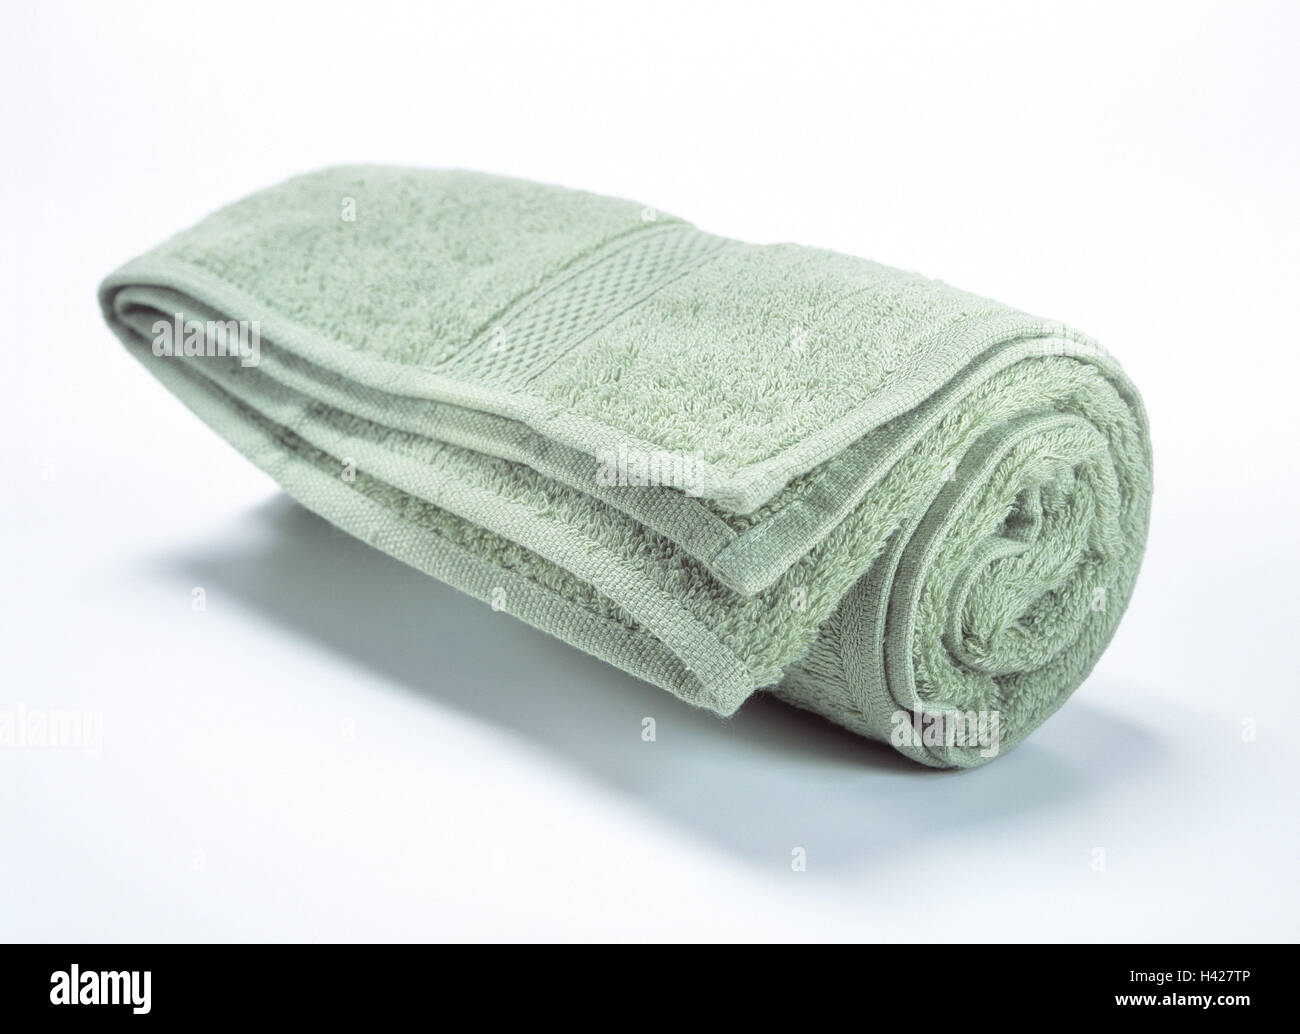 Towelling towel, green, scrolled towel, dry cloth, terry cloth, substance, structure, fleecily, softy, rolled up, dry, dry up, conception, personal care, body hygiene, hygiene, Still life, product photography, studio, cut outs Stock Photo